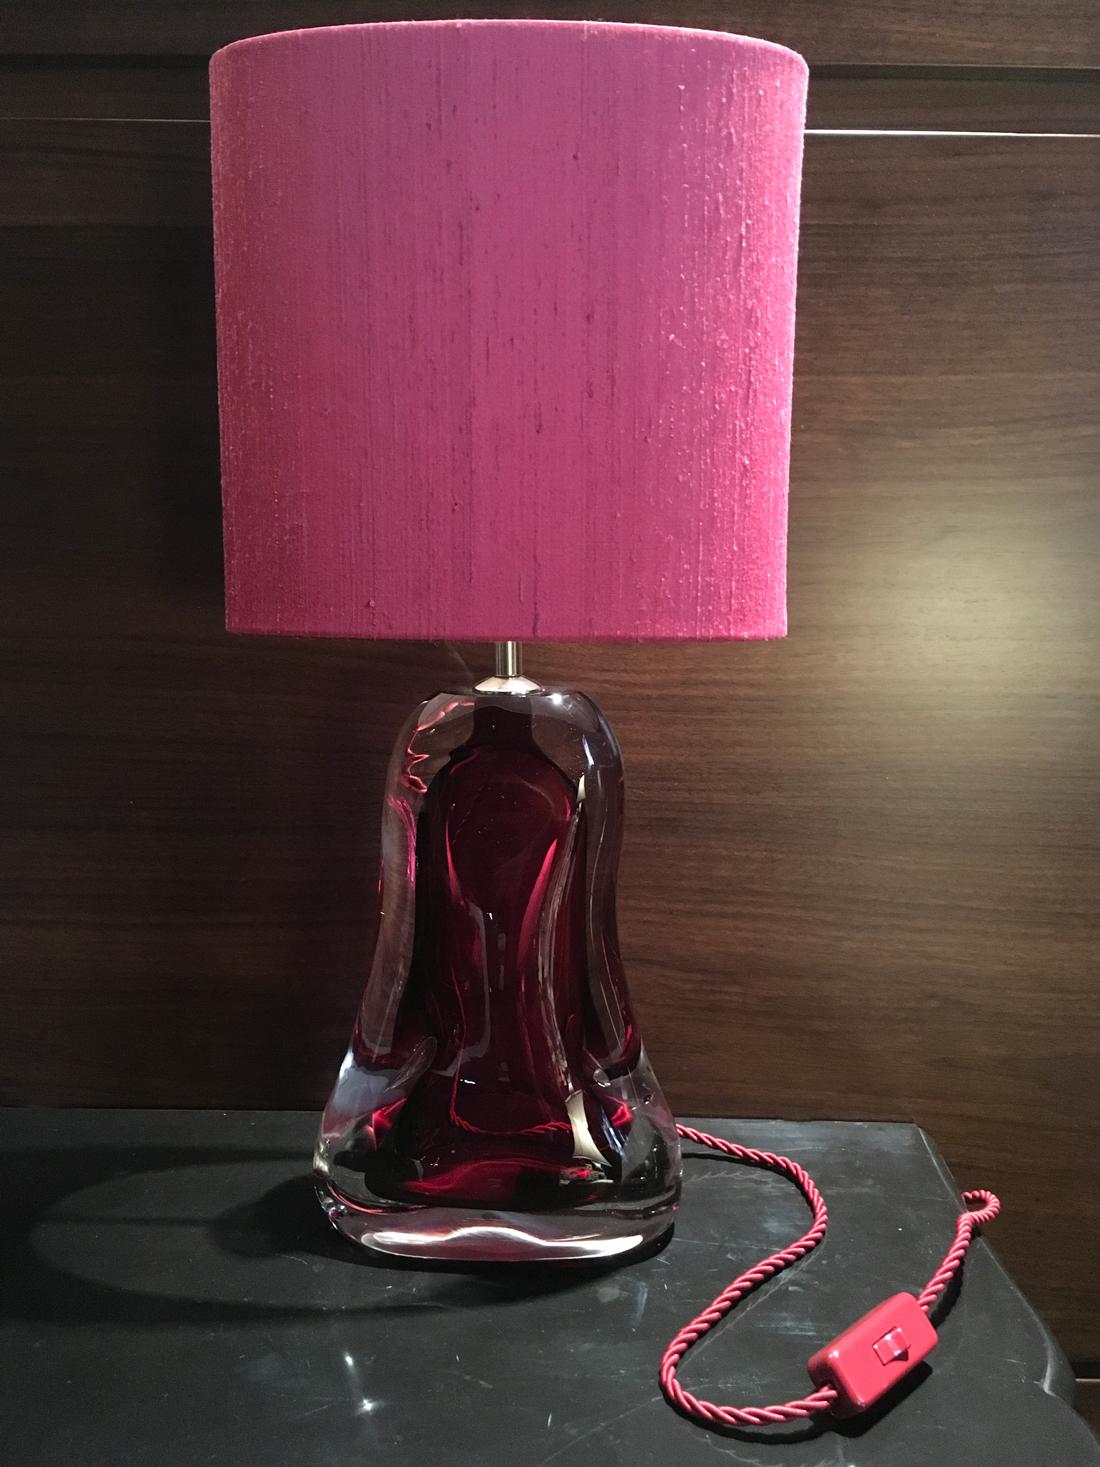 Contemporary fuchsia blown glass table lamp with fuchsia silk lamp shade is a beautiful eye-catching object of art for the solid presence of the handcrafted glass.
Made by Porta Romana, United Kingdom
220-240 V max wattage 40W
EU wiring.
USA/GB